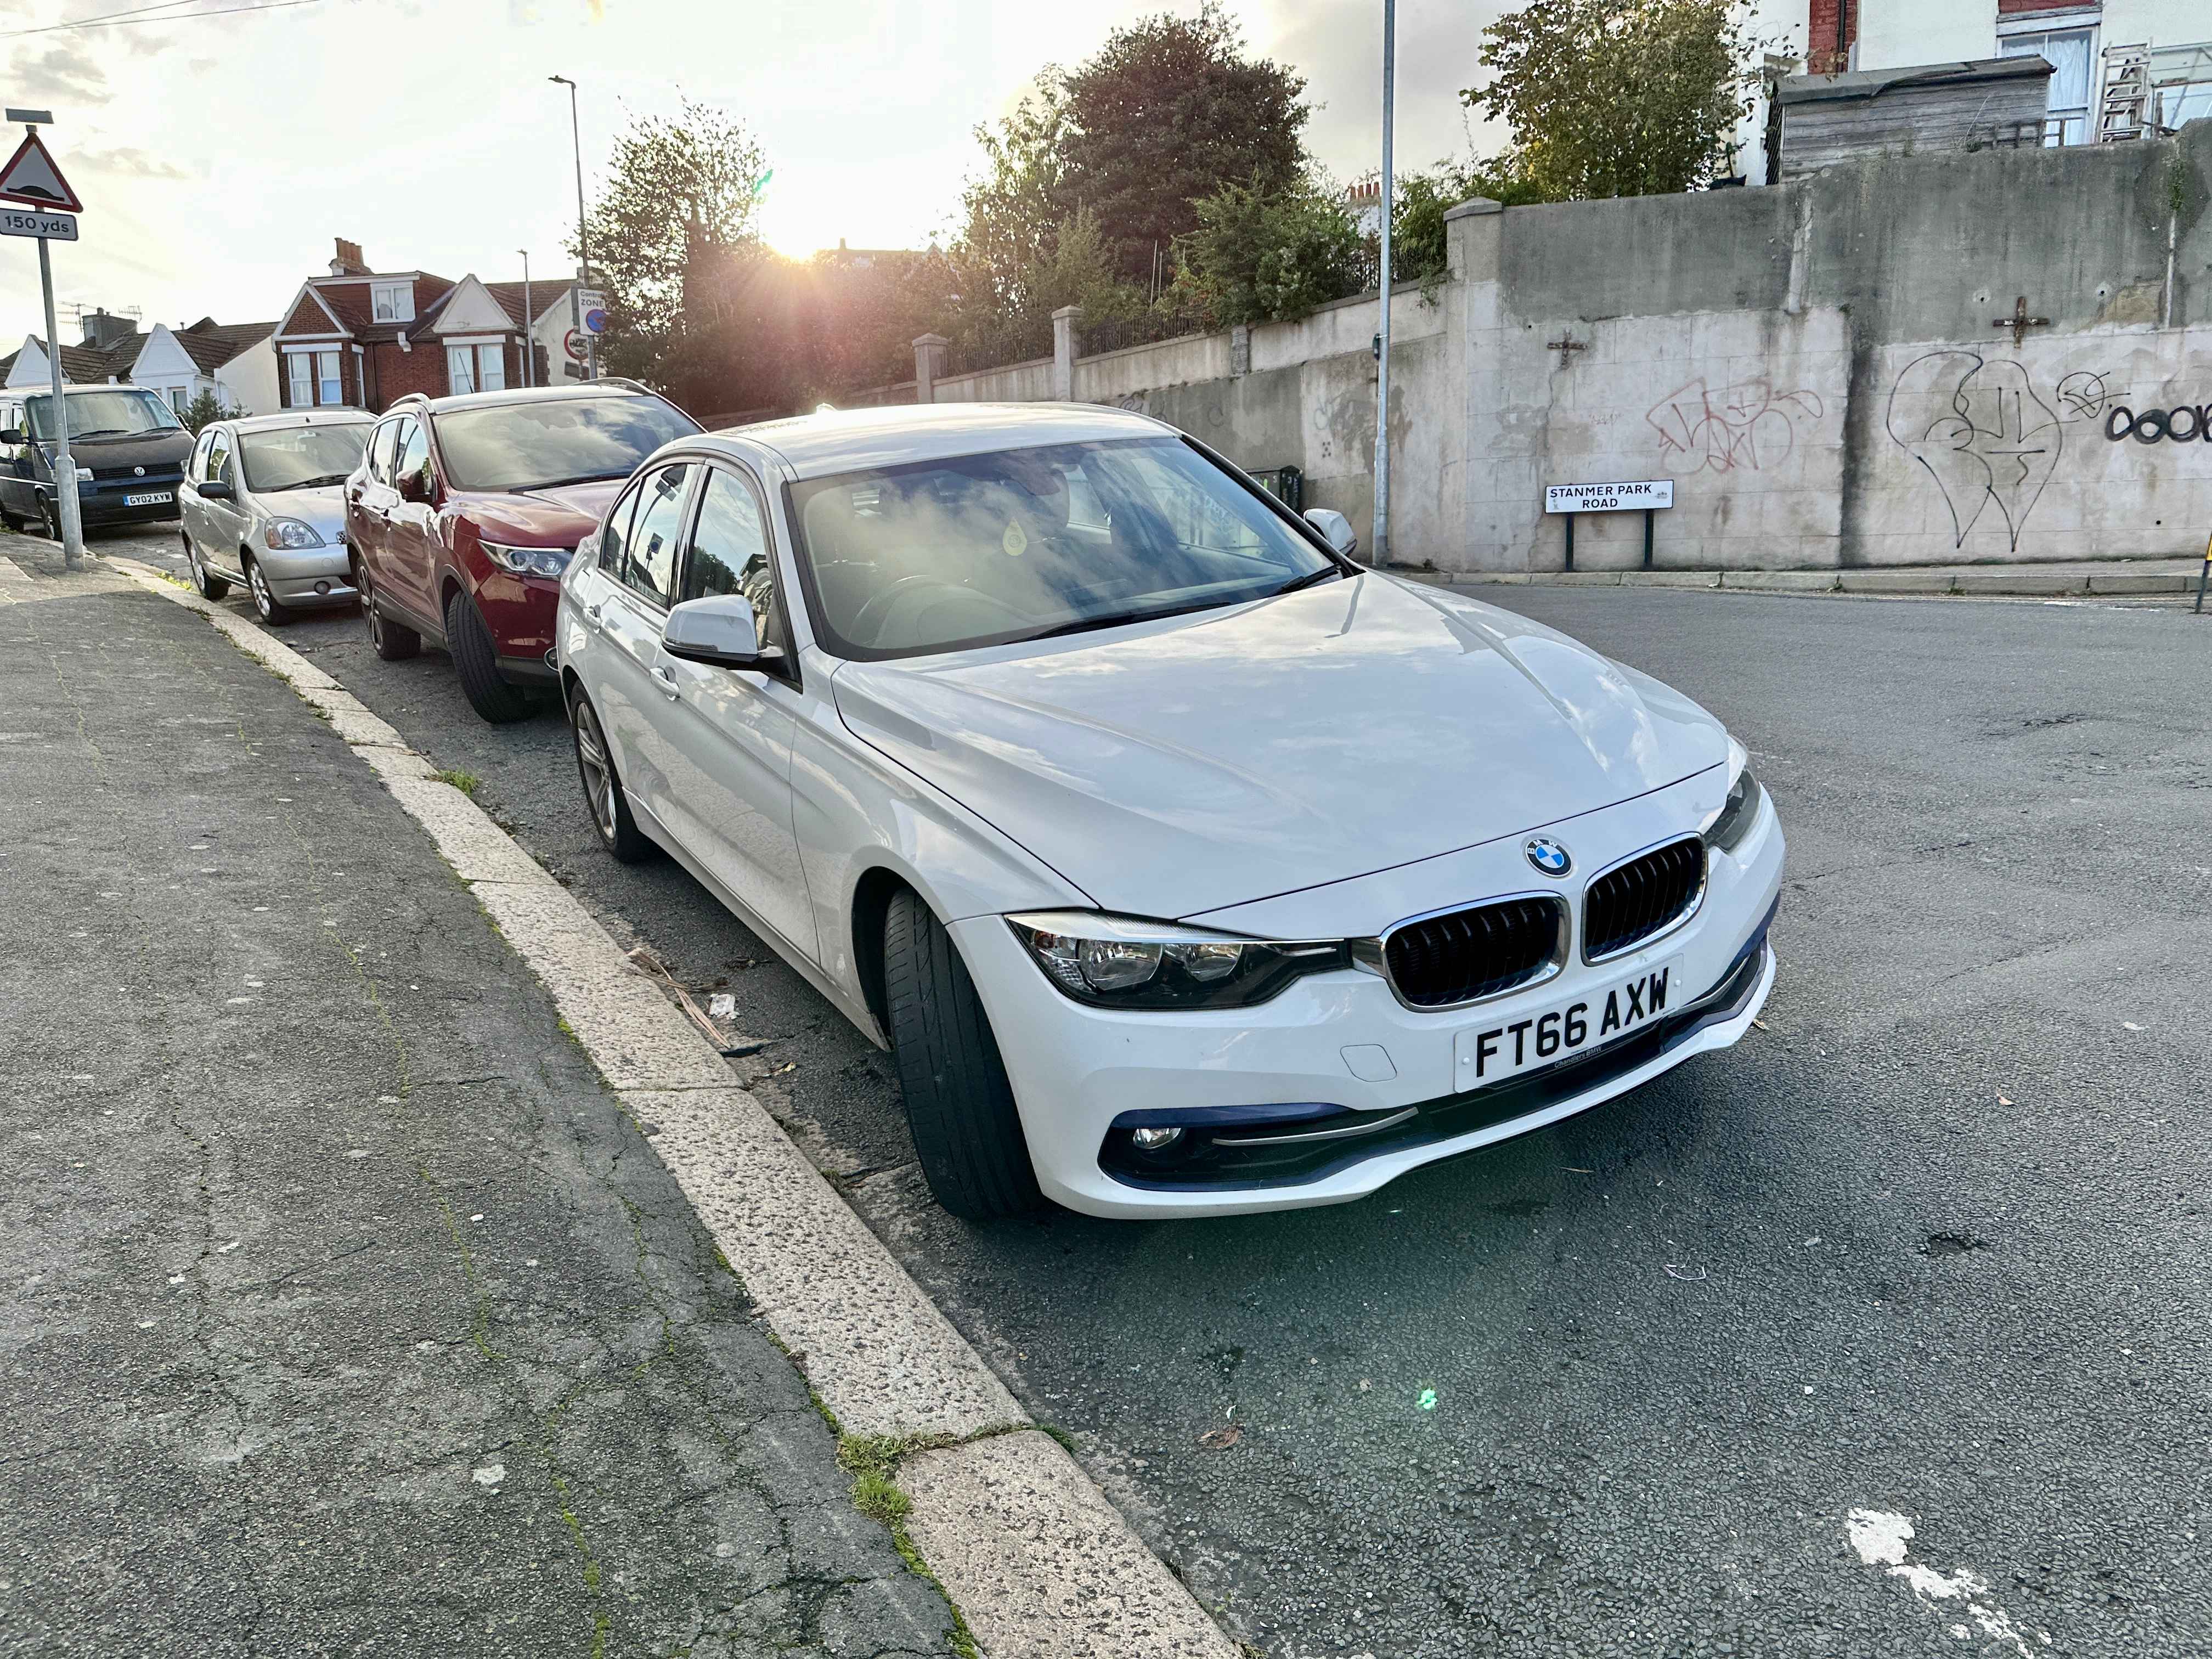 Photograph of FT66 AXW - a White BMW 3 Series parked in Hollingdean by a non-resident who uses the local area as part of their Brighton commute. The second of seven photographs supplied by the residents of Hollingdean.